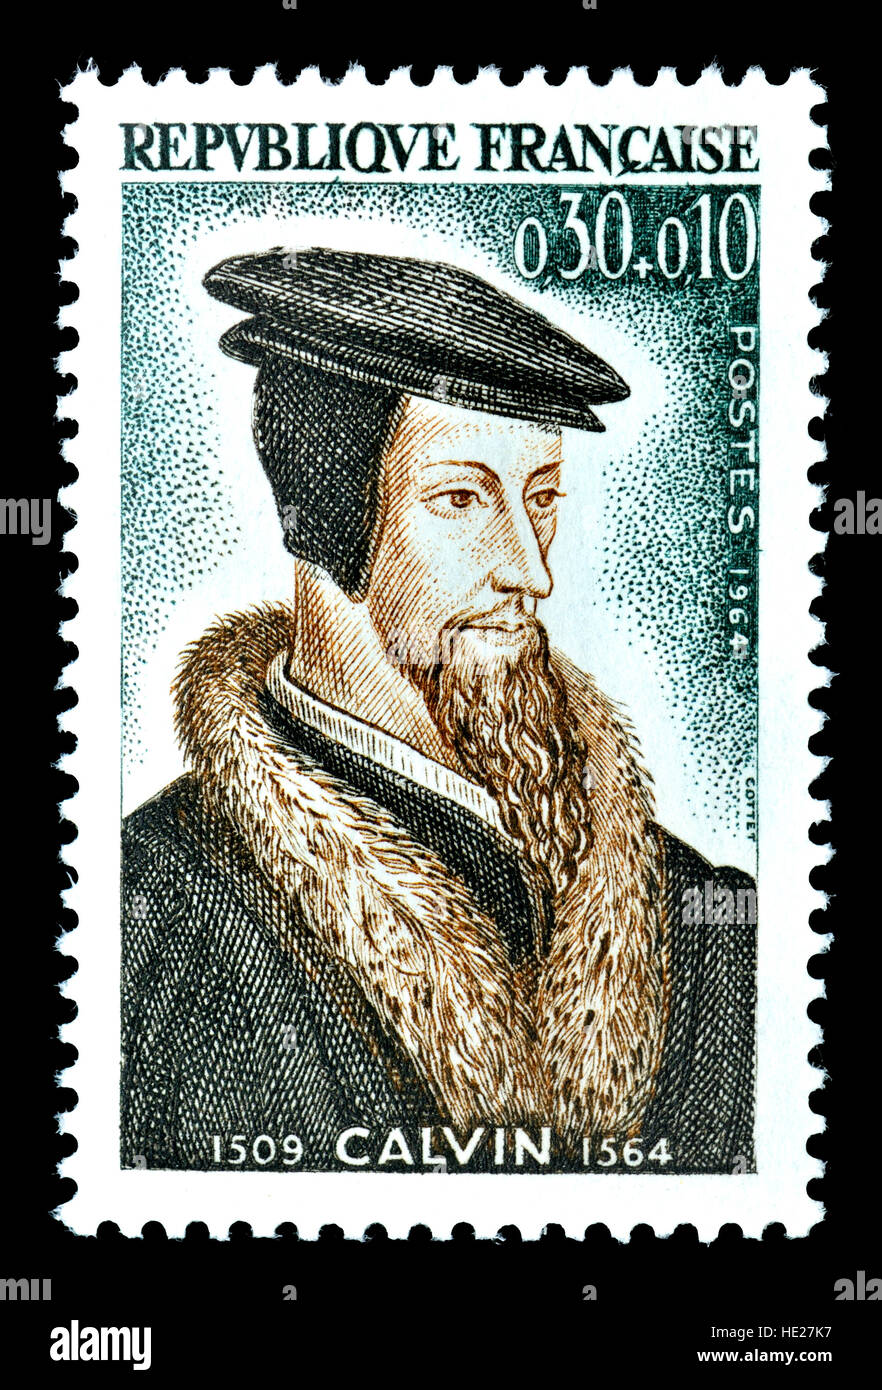 French postage stamp (1964) : John Calvin (French: Jean Calvin,  born Jehan Cauvin: 1509 – 1564) French theologian and pastor during the Protestant... Stock Photo